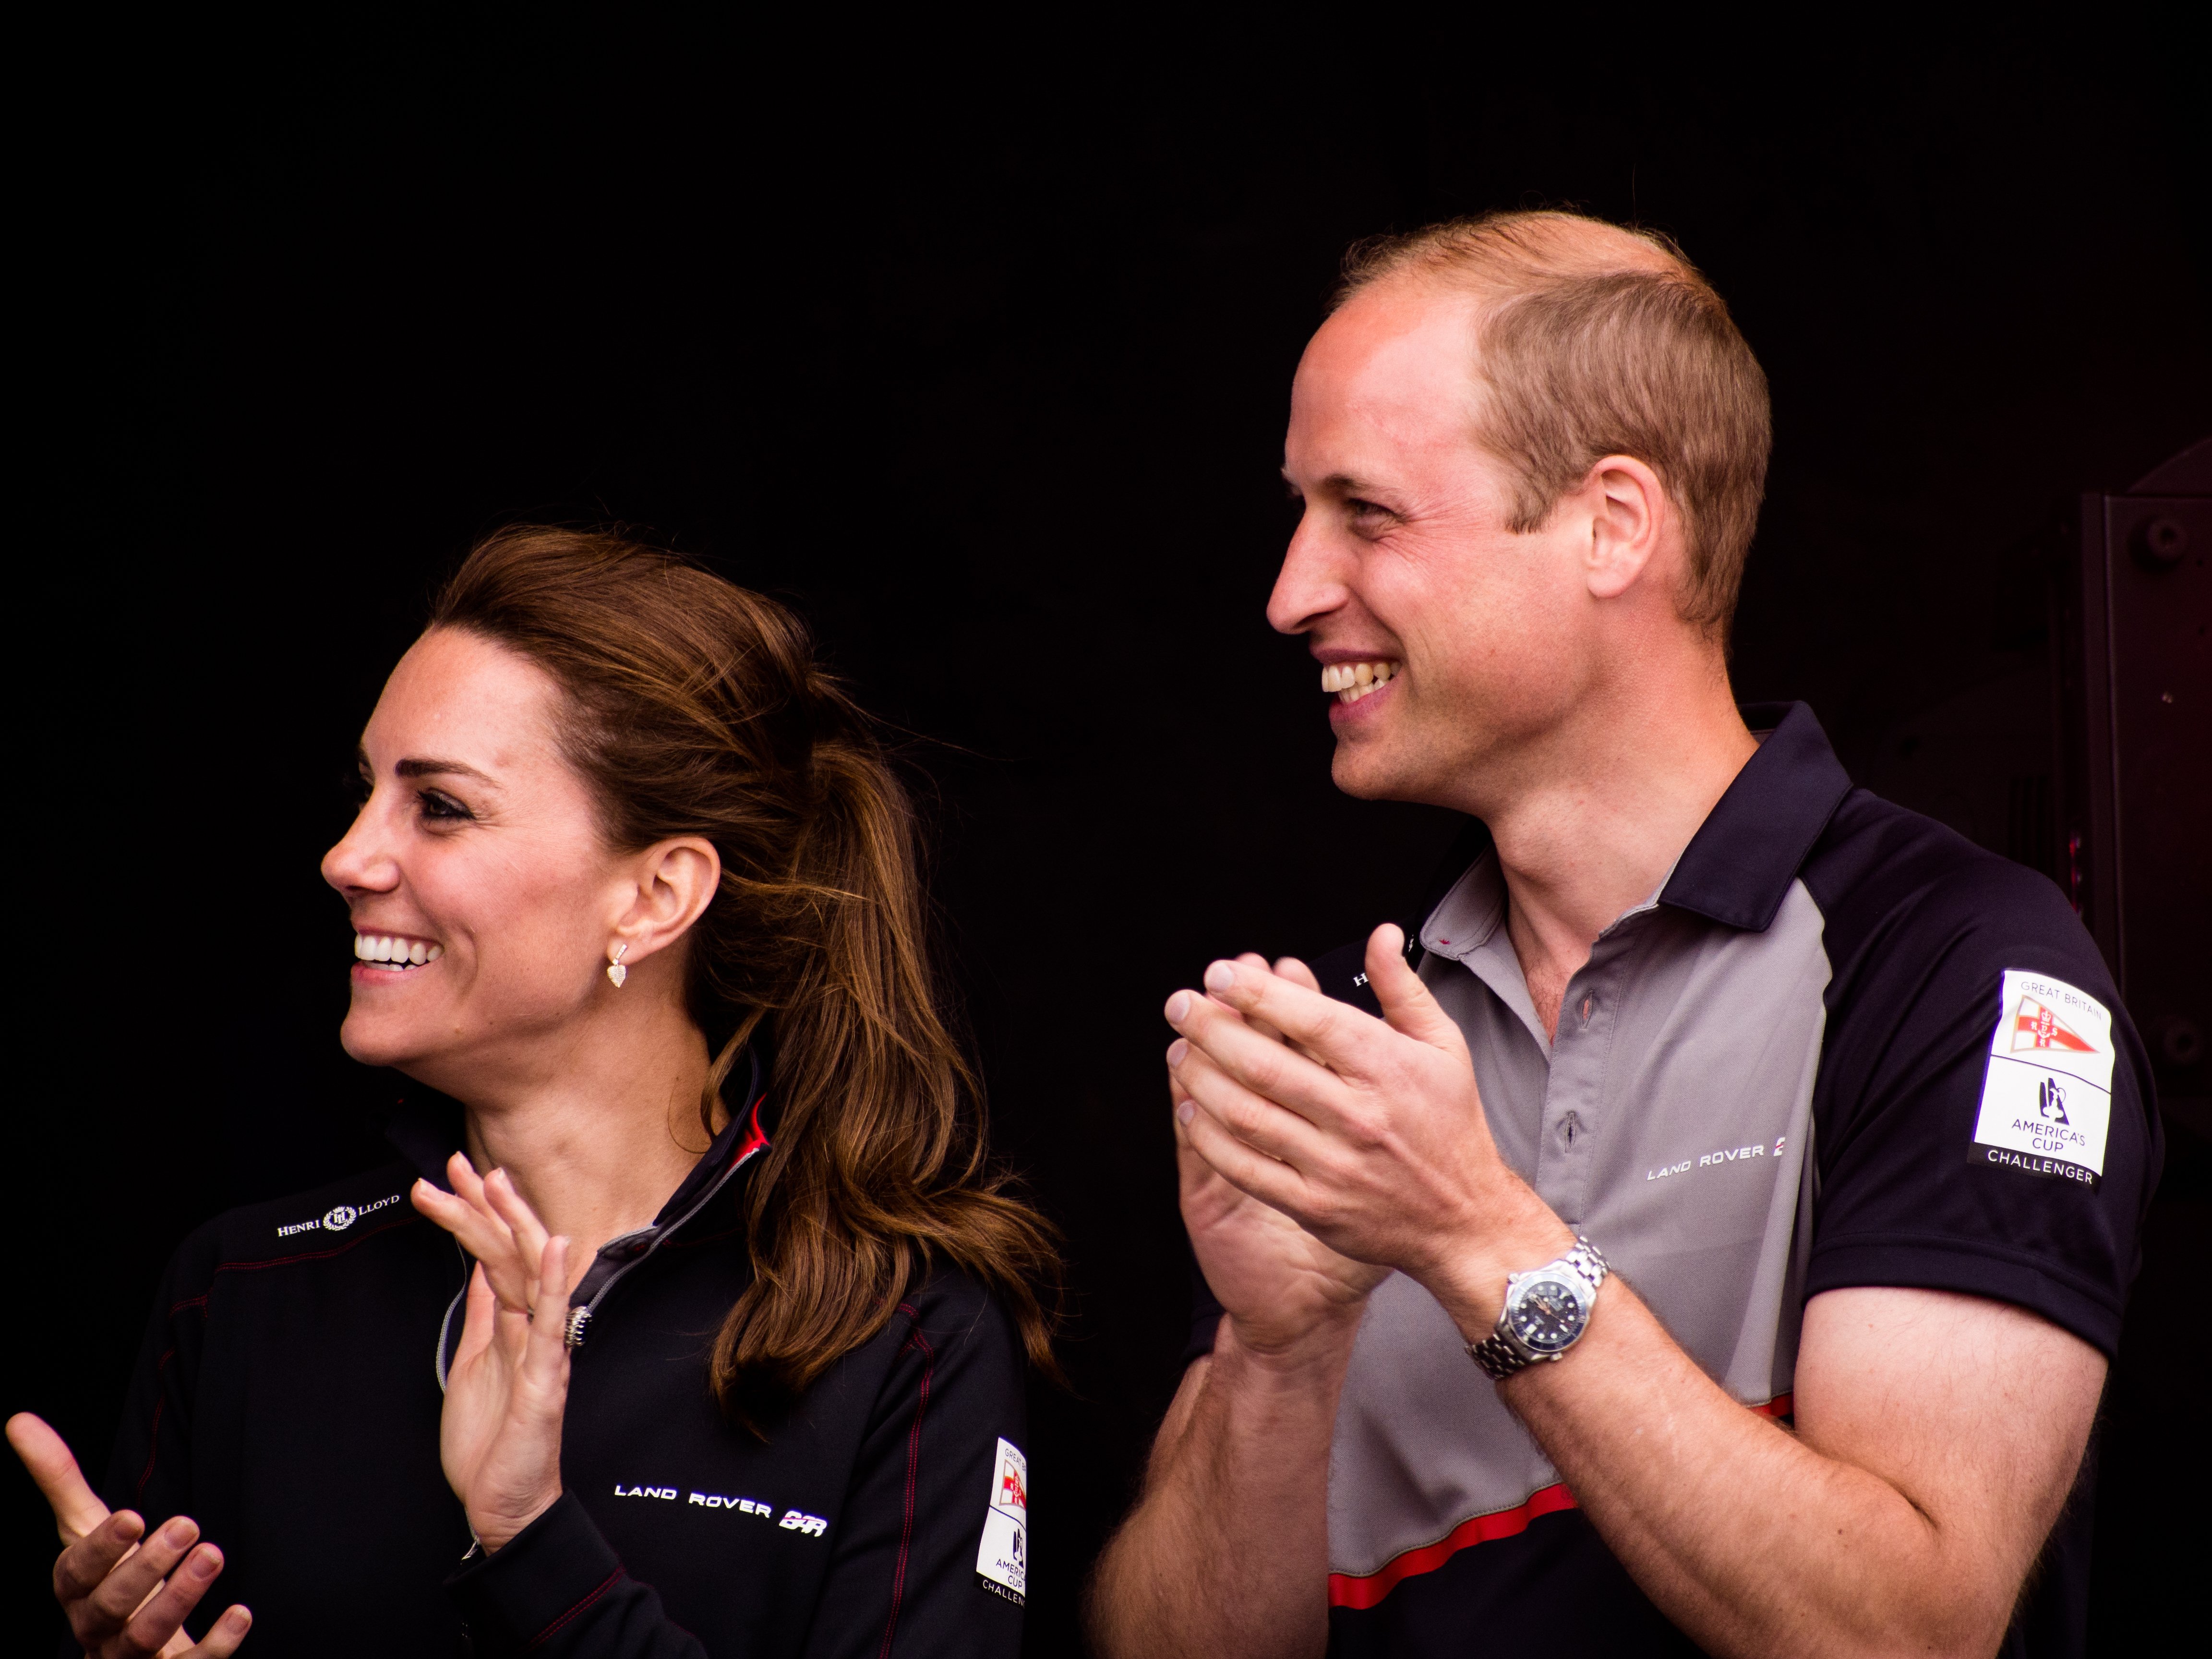 Prince William and Kate Middleton applaud the arrival onshore of the sailors taking part in the Americas Cup World Series on July 24, 2016 in Portsmouth | Photo: Shutterstock